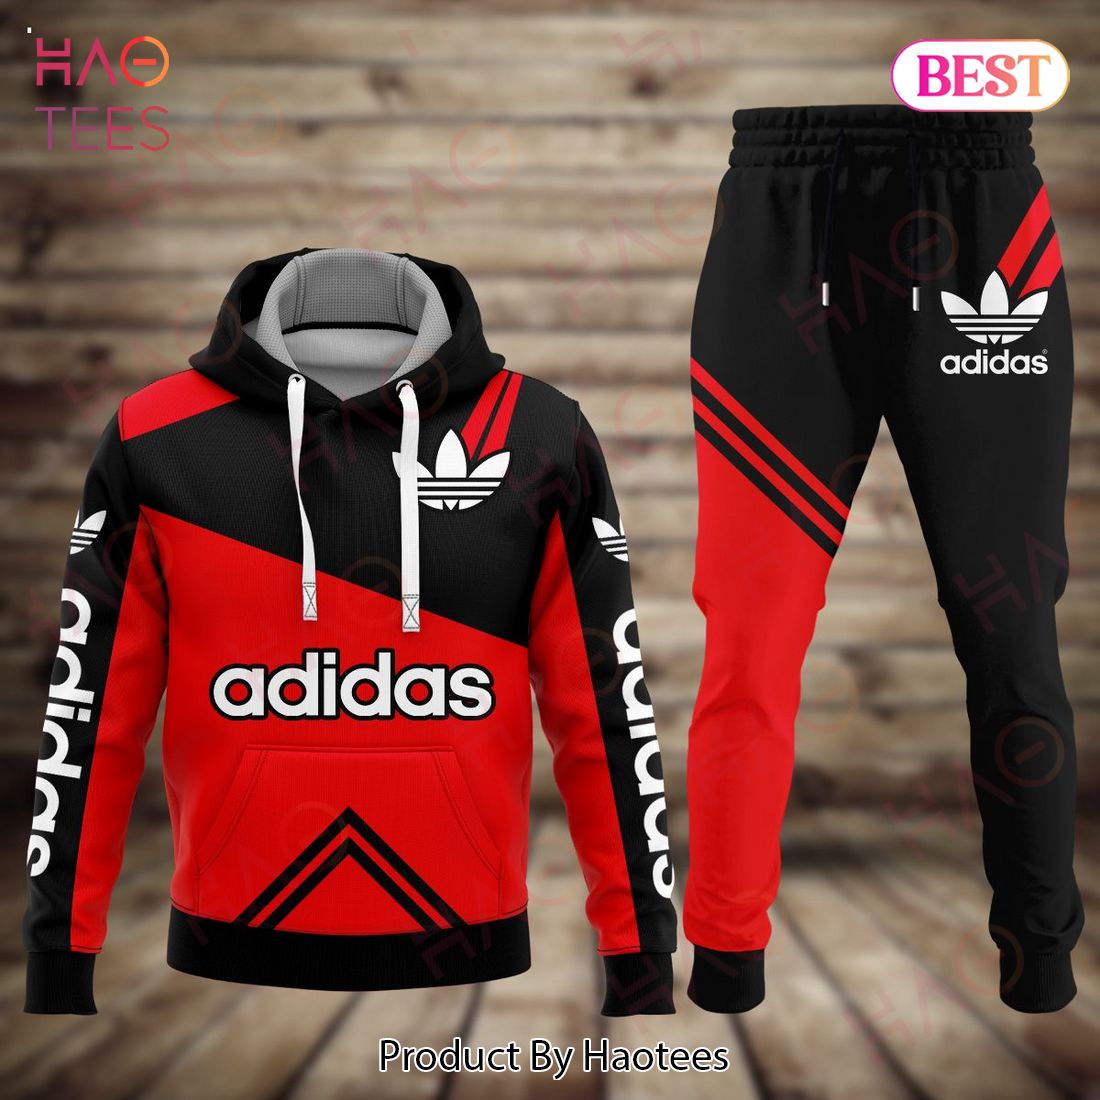 BEST Adidas Red Mix Black Luxury Brand Hoodie And Pants Limited Edition